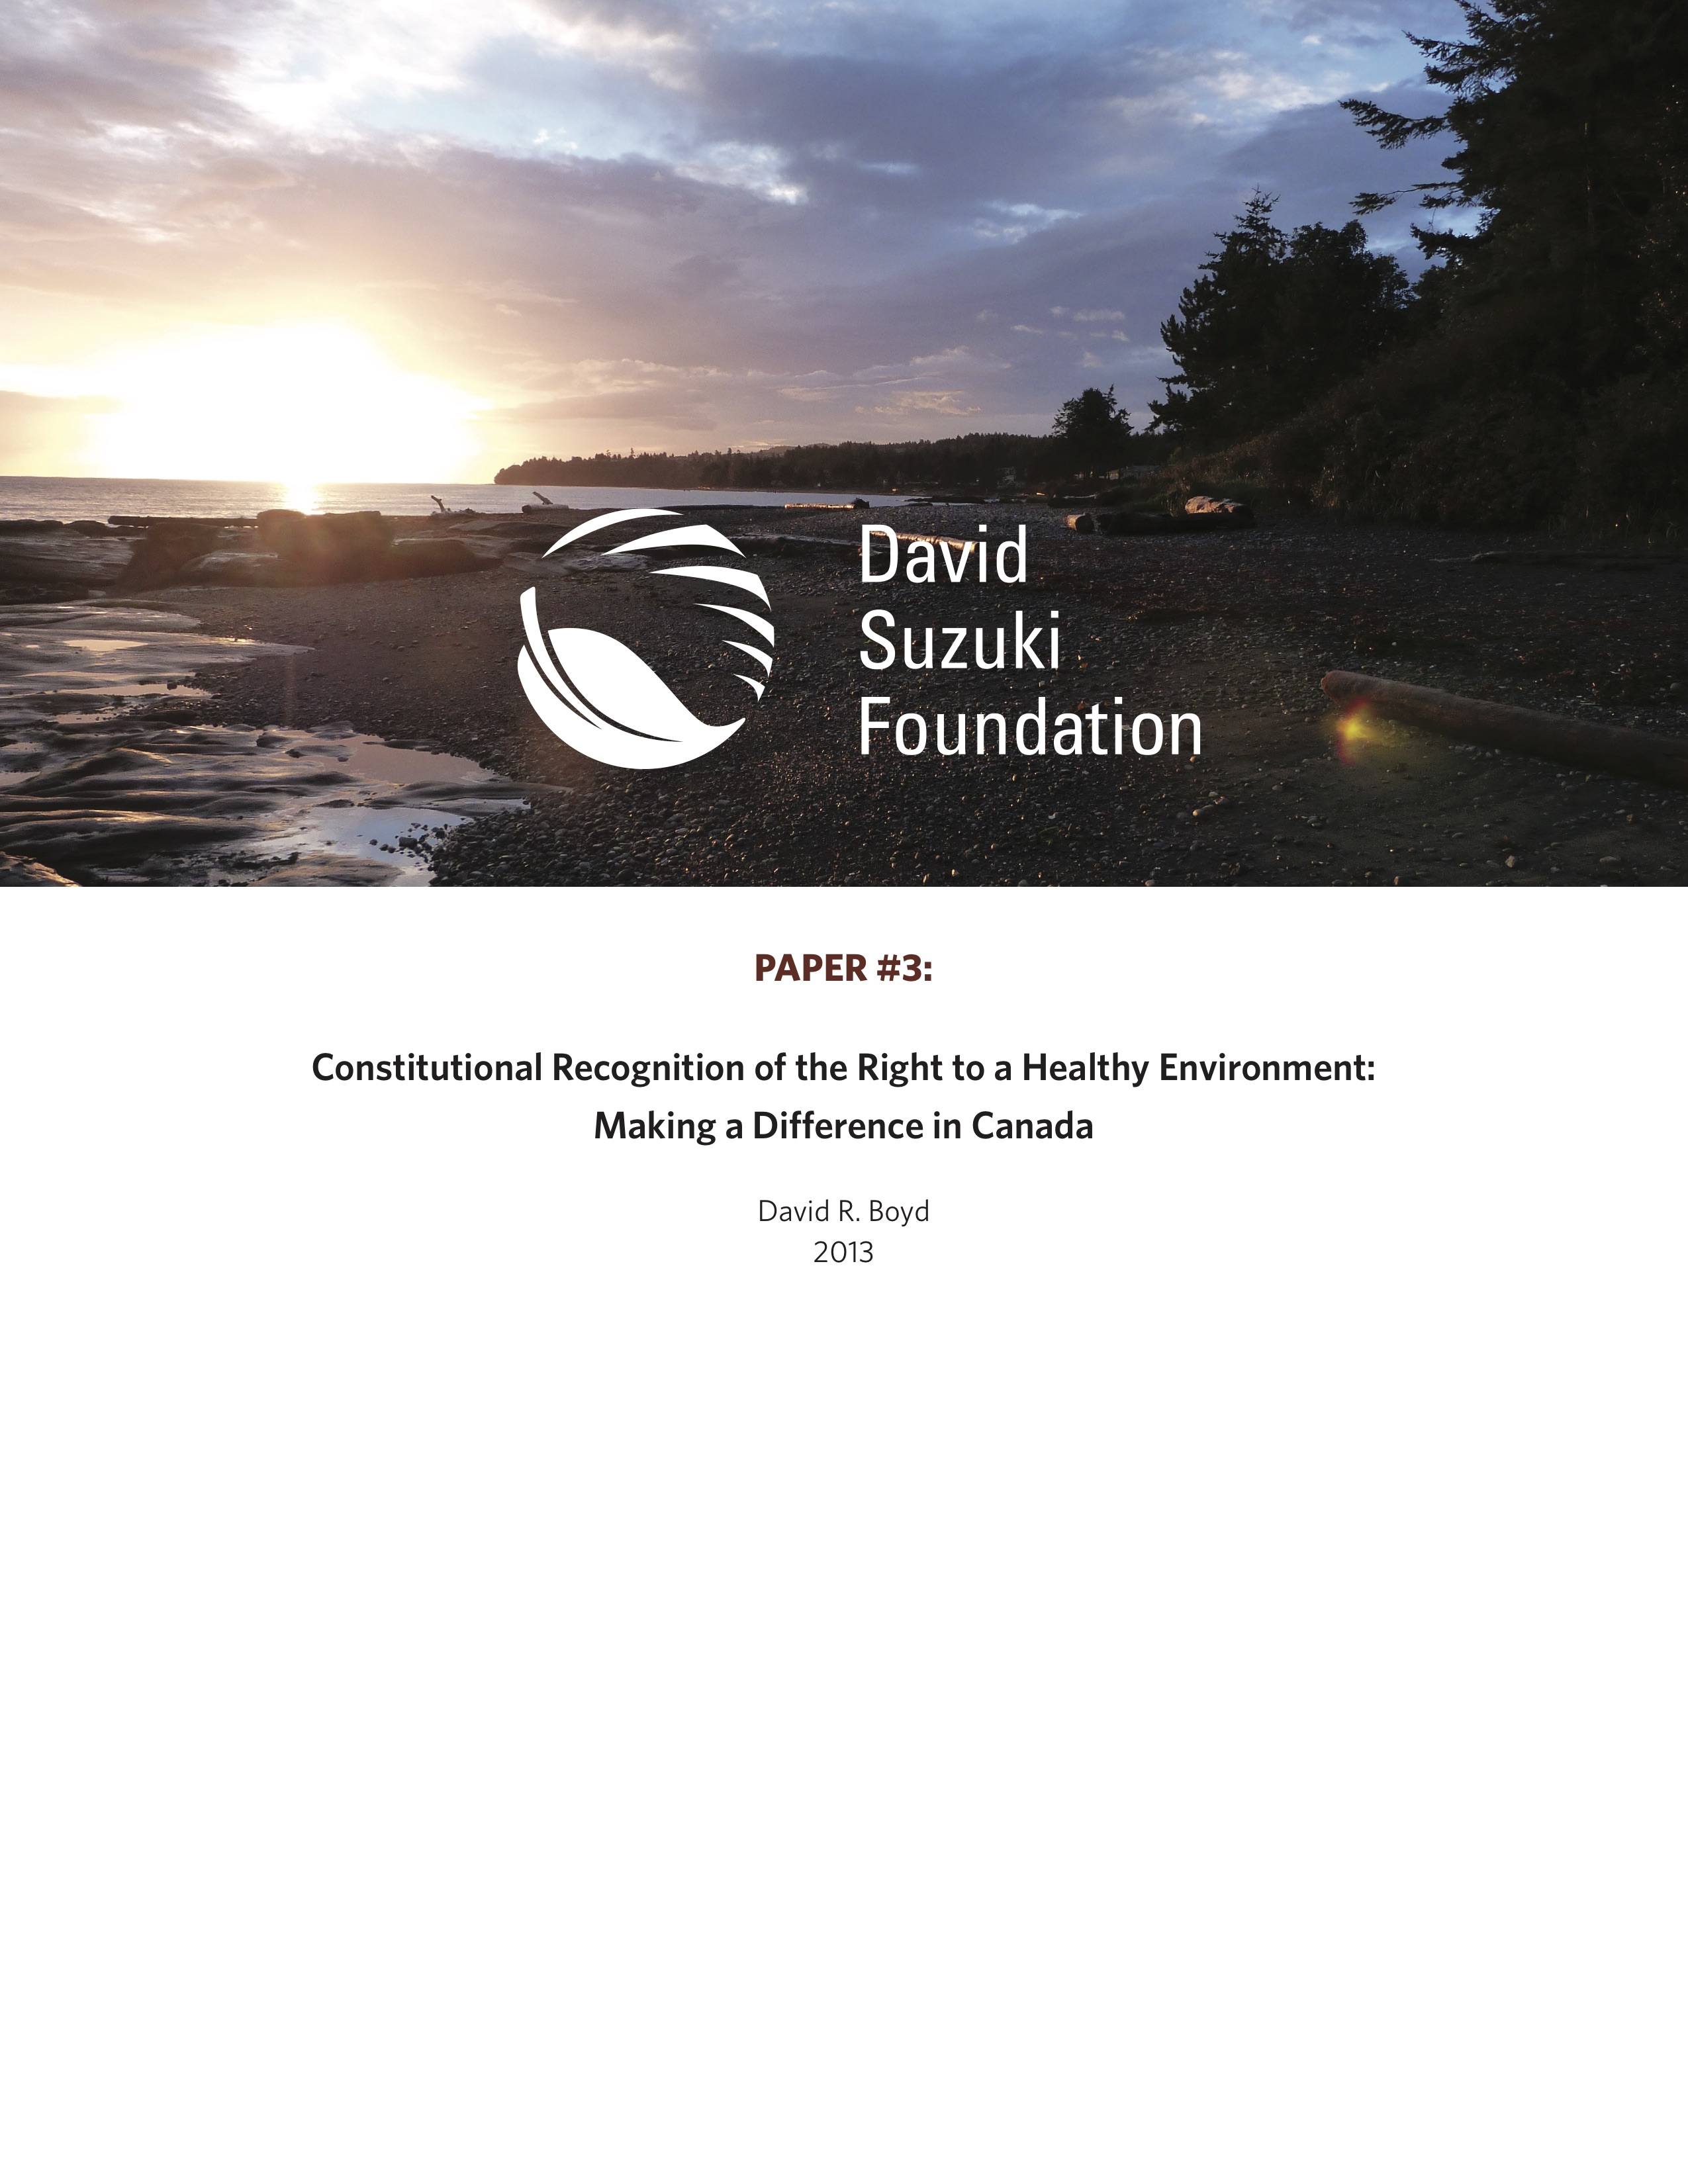 Constitutional Recognition of the Right to a Healthy Environment: Making a Difference in Canada